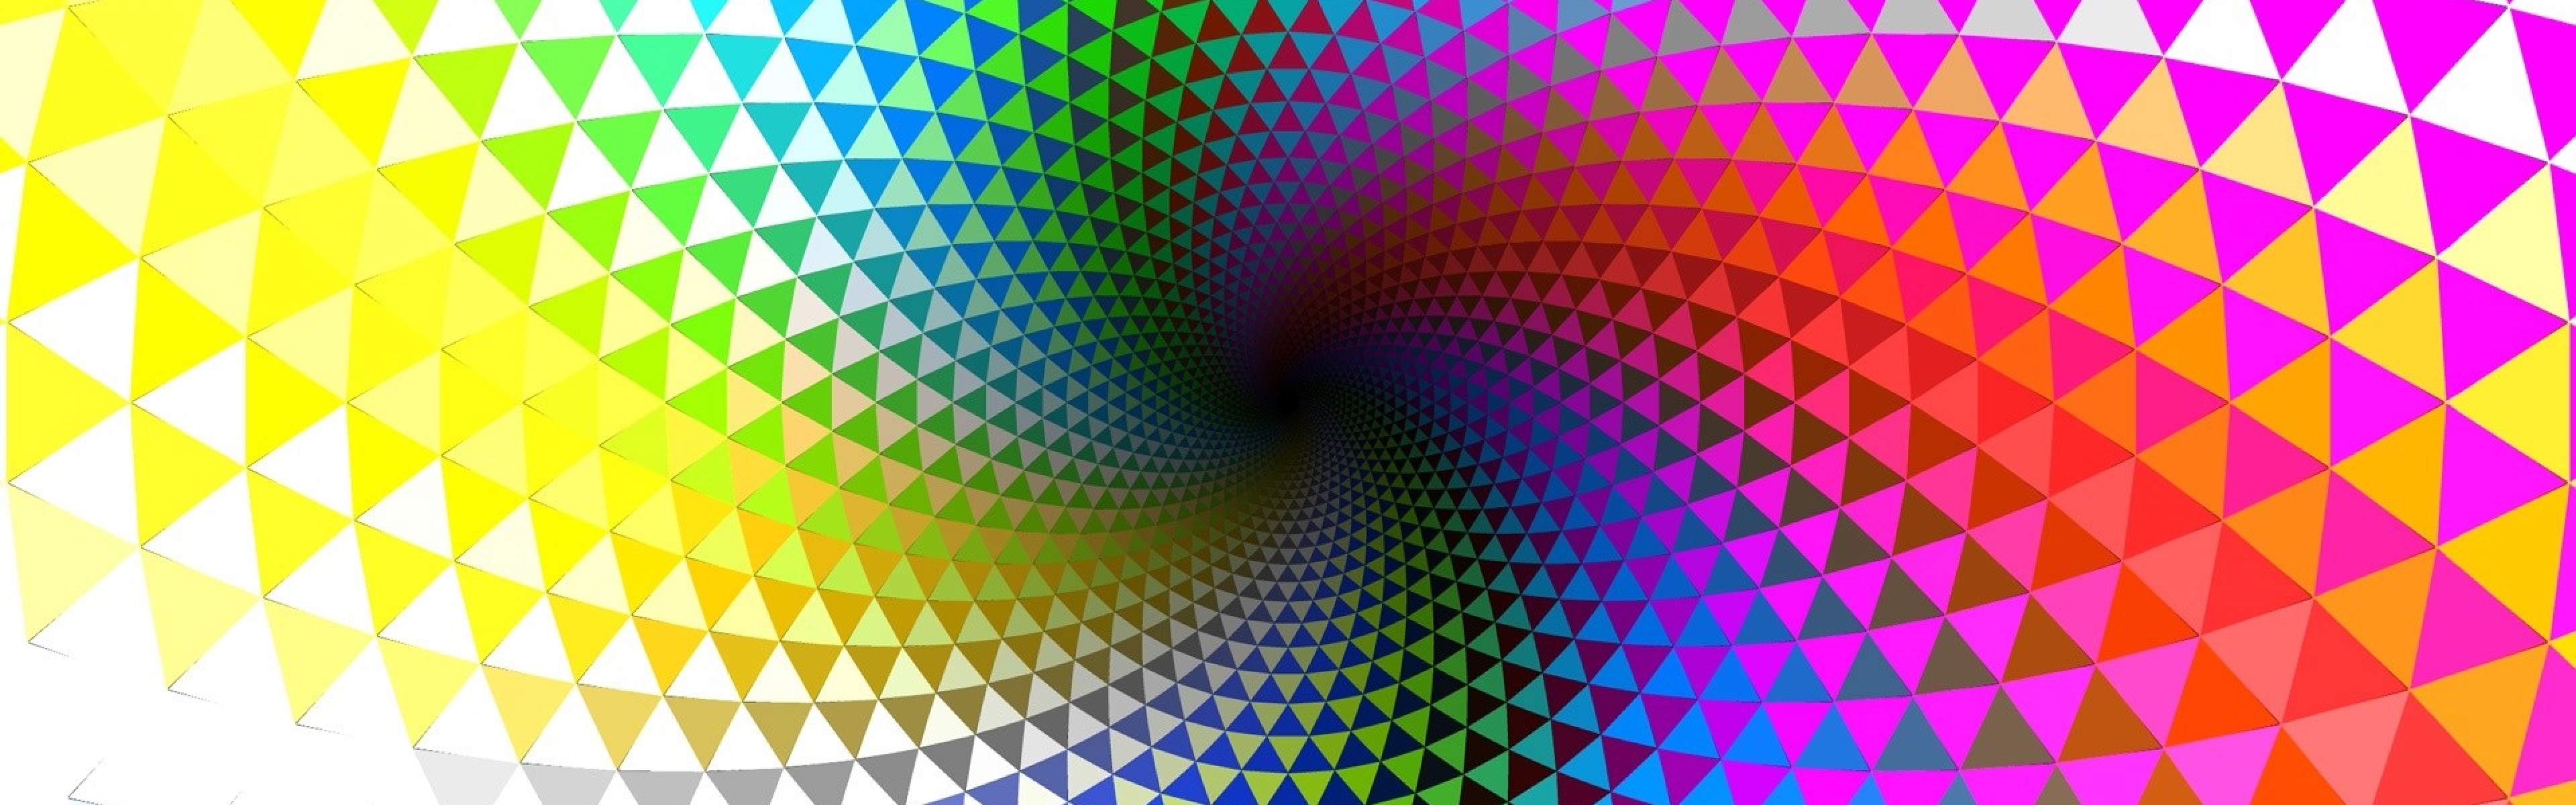 Download Wallpaper 3840x1200 Rotation, Multi-colored, Lines, shape ...